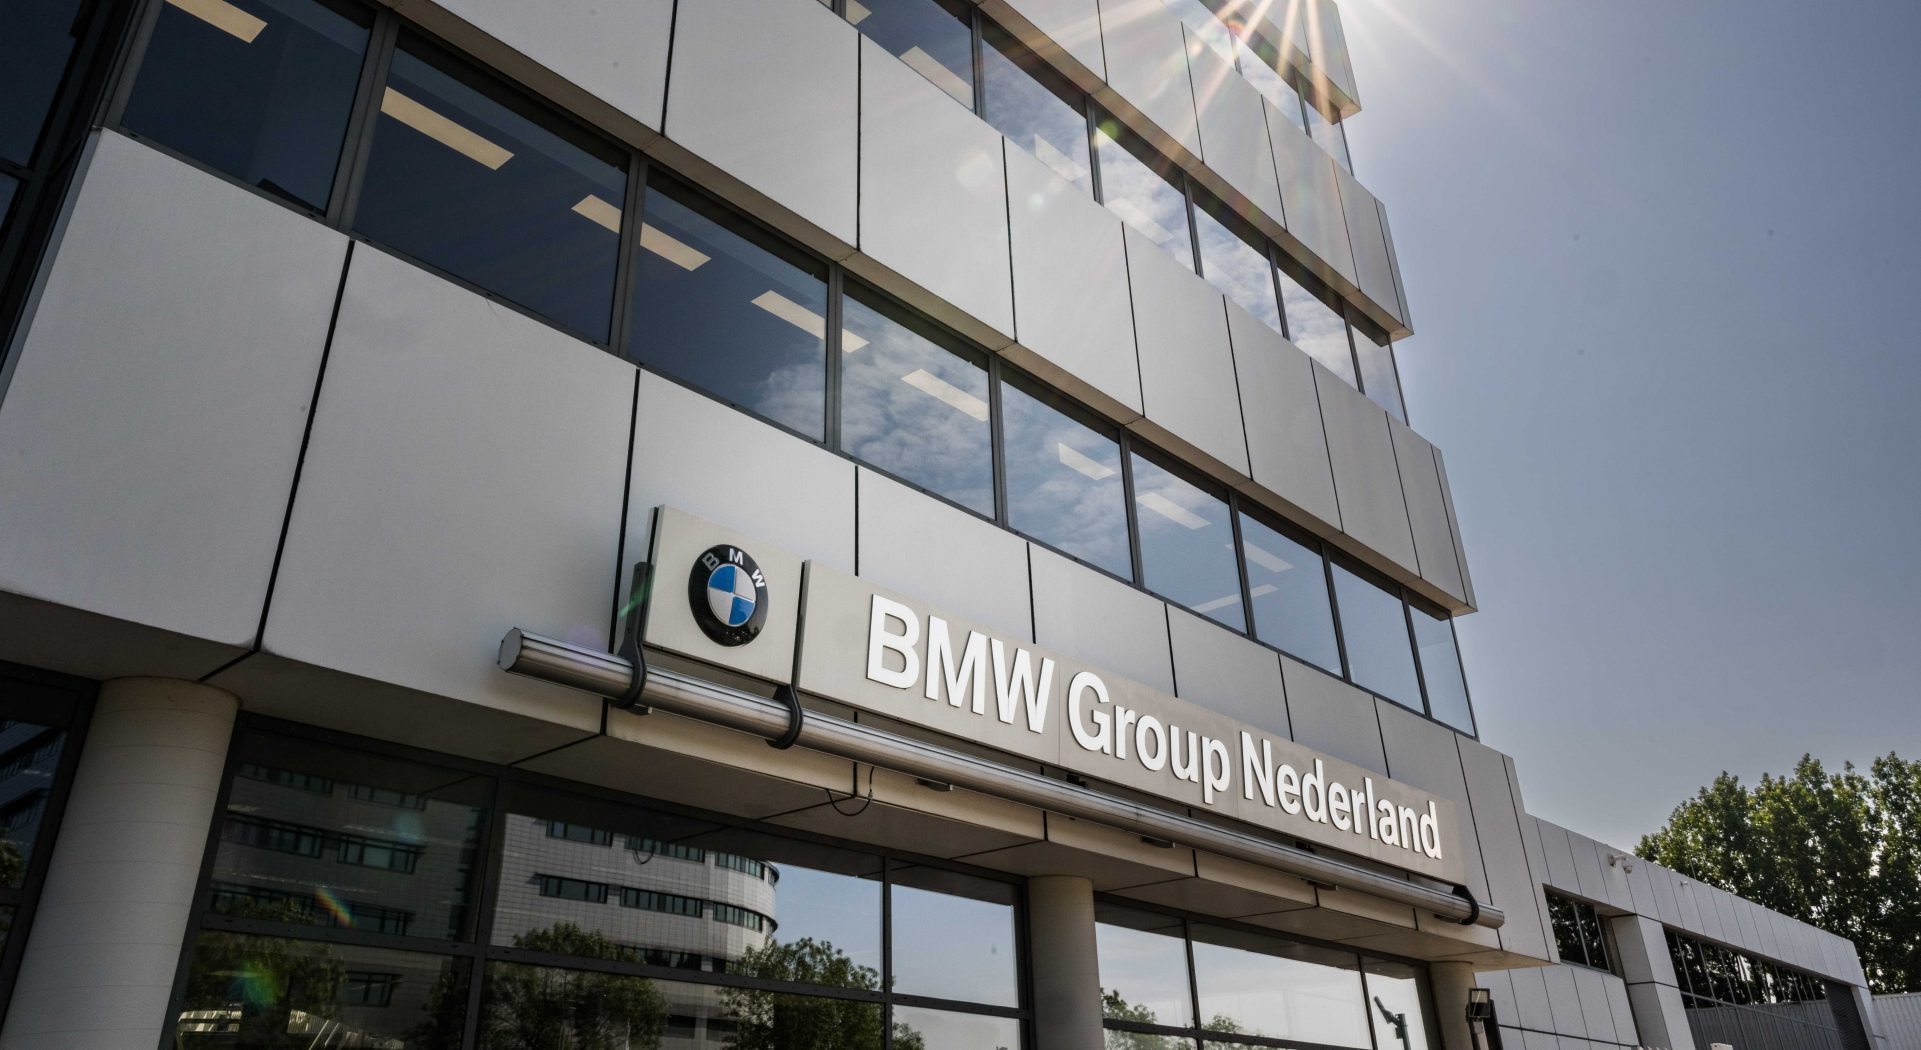 Entities at BMW Group Netherlands.